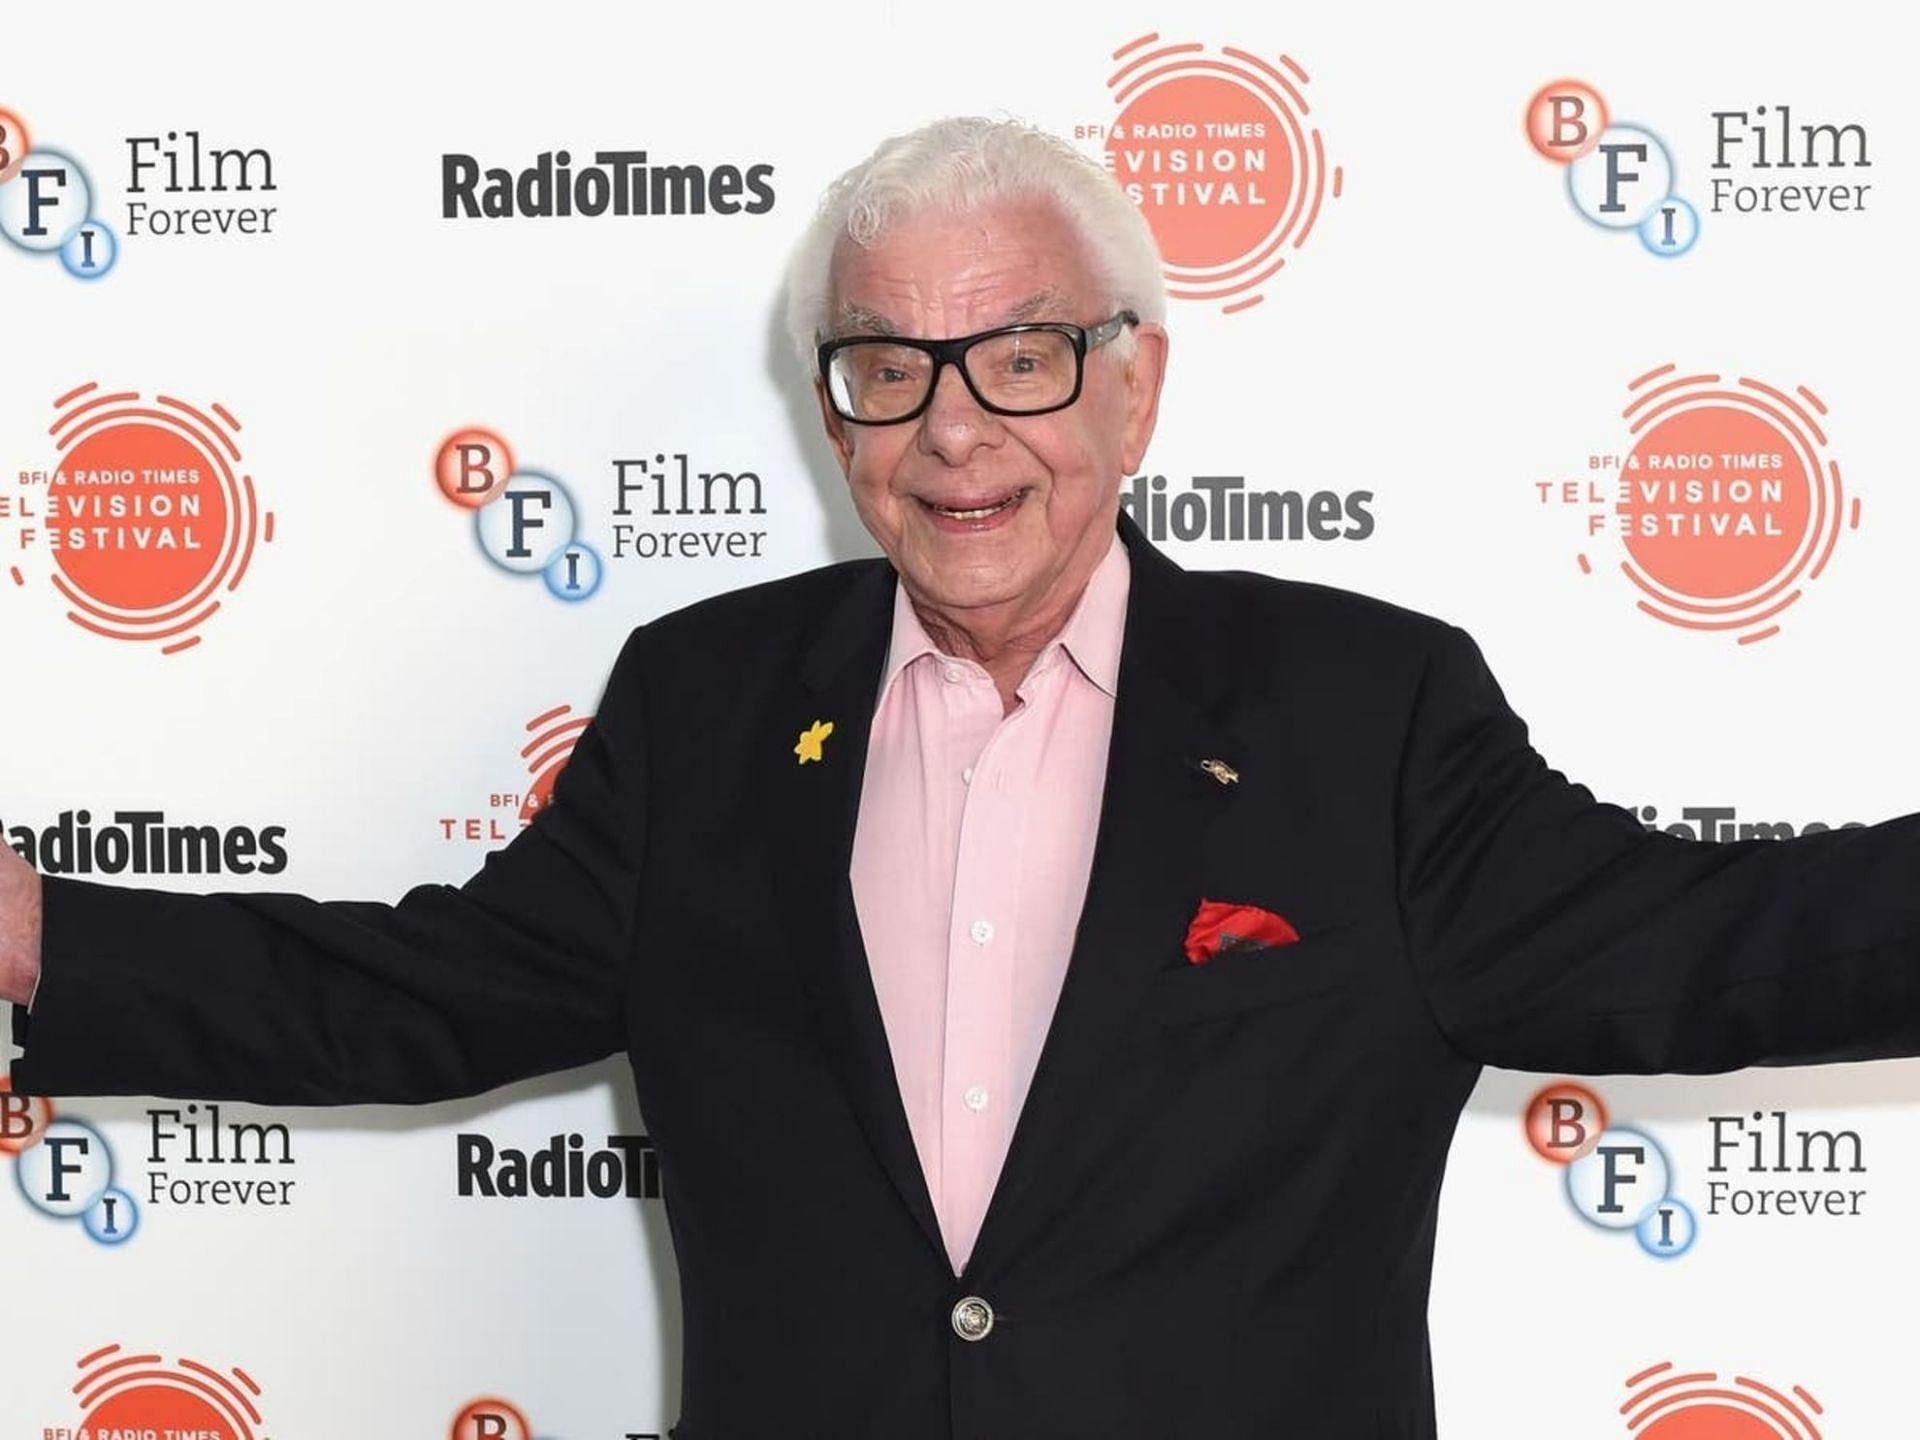 The late comedian, Barry Cryer (Image via Tabatha Fireman/Getty Images)